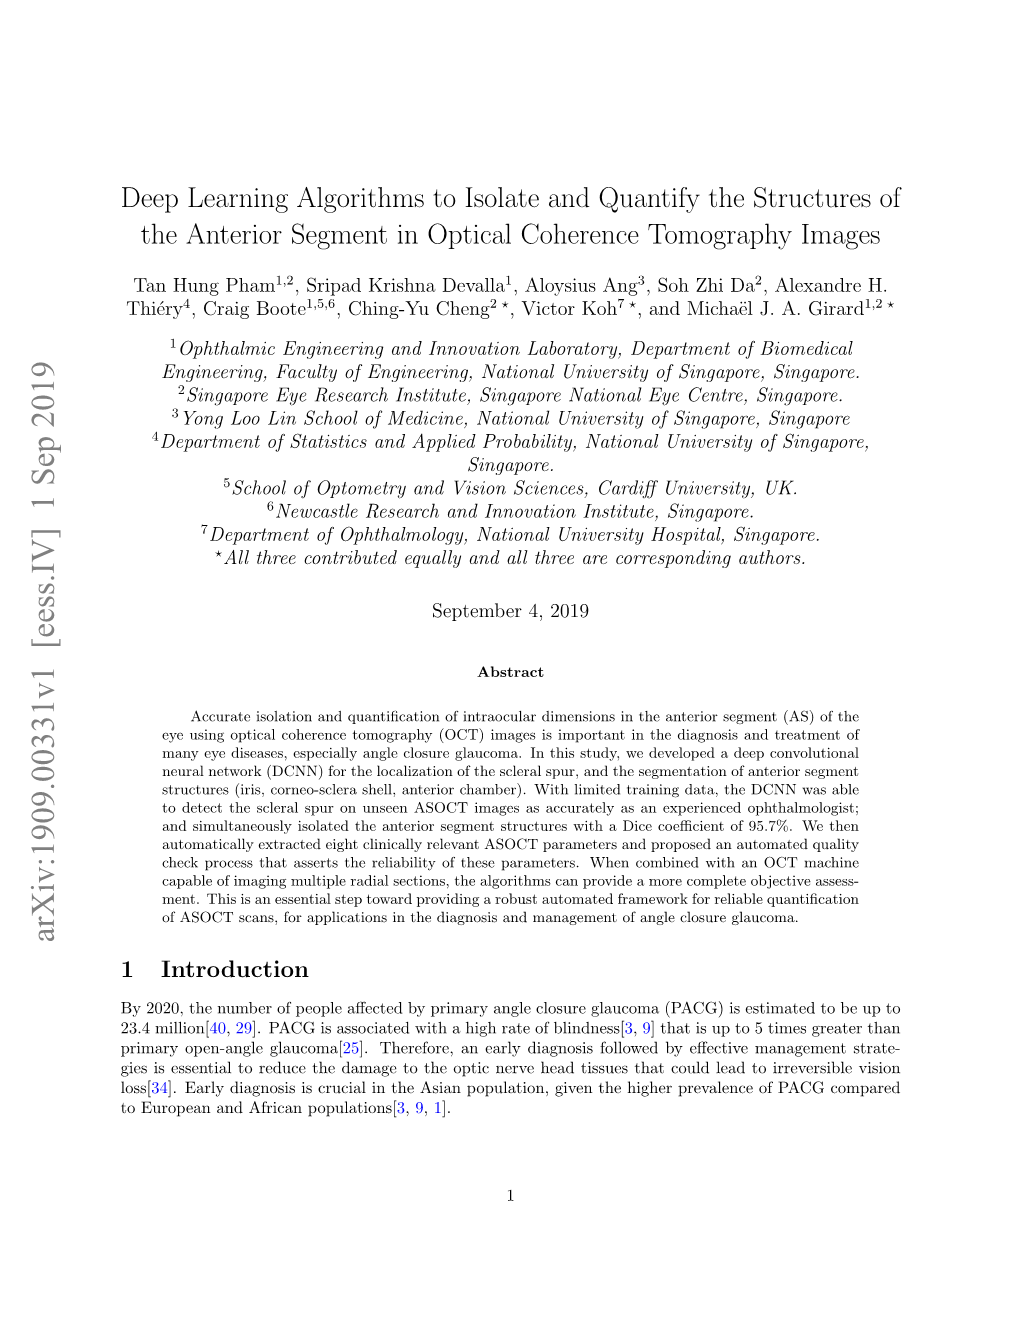 Deep Learning Algorithms to Isolate and Quantify the Structures of the Anterior Segment in Optical Coherence Tomography Images